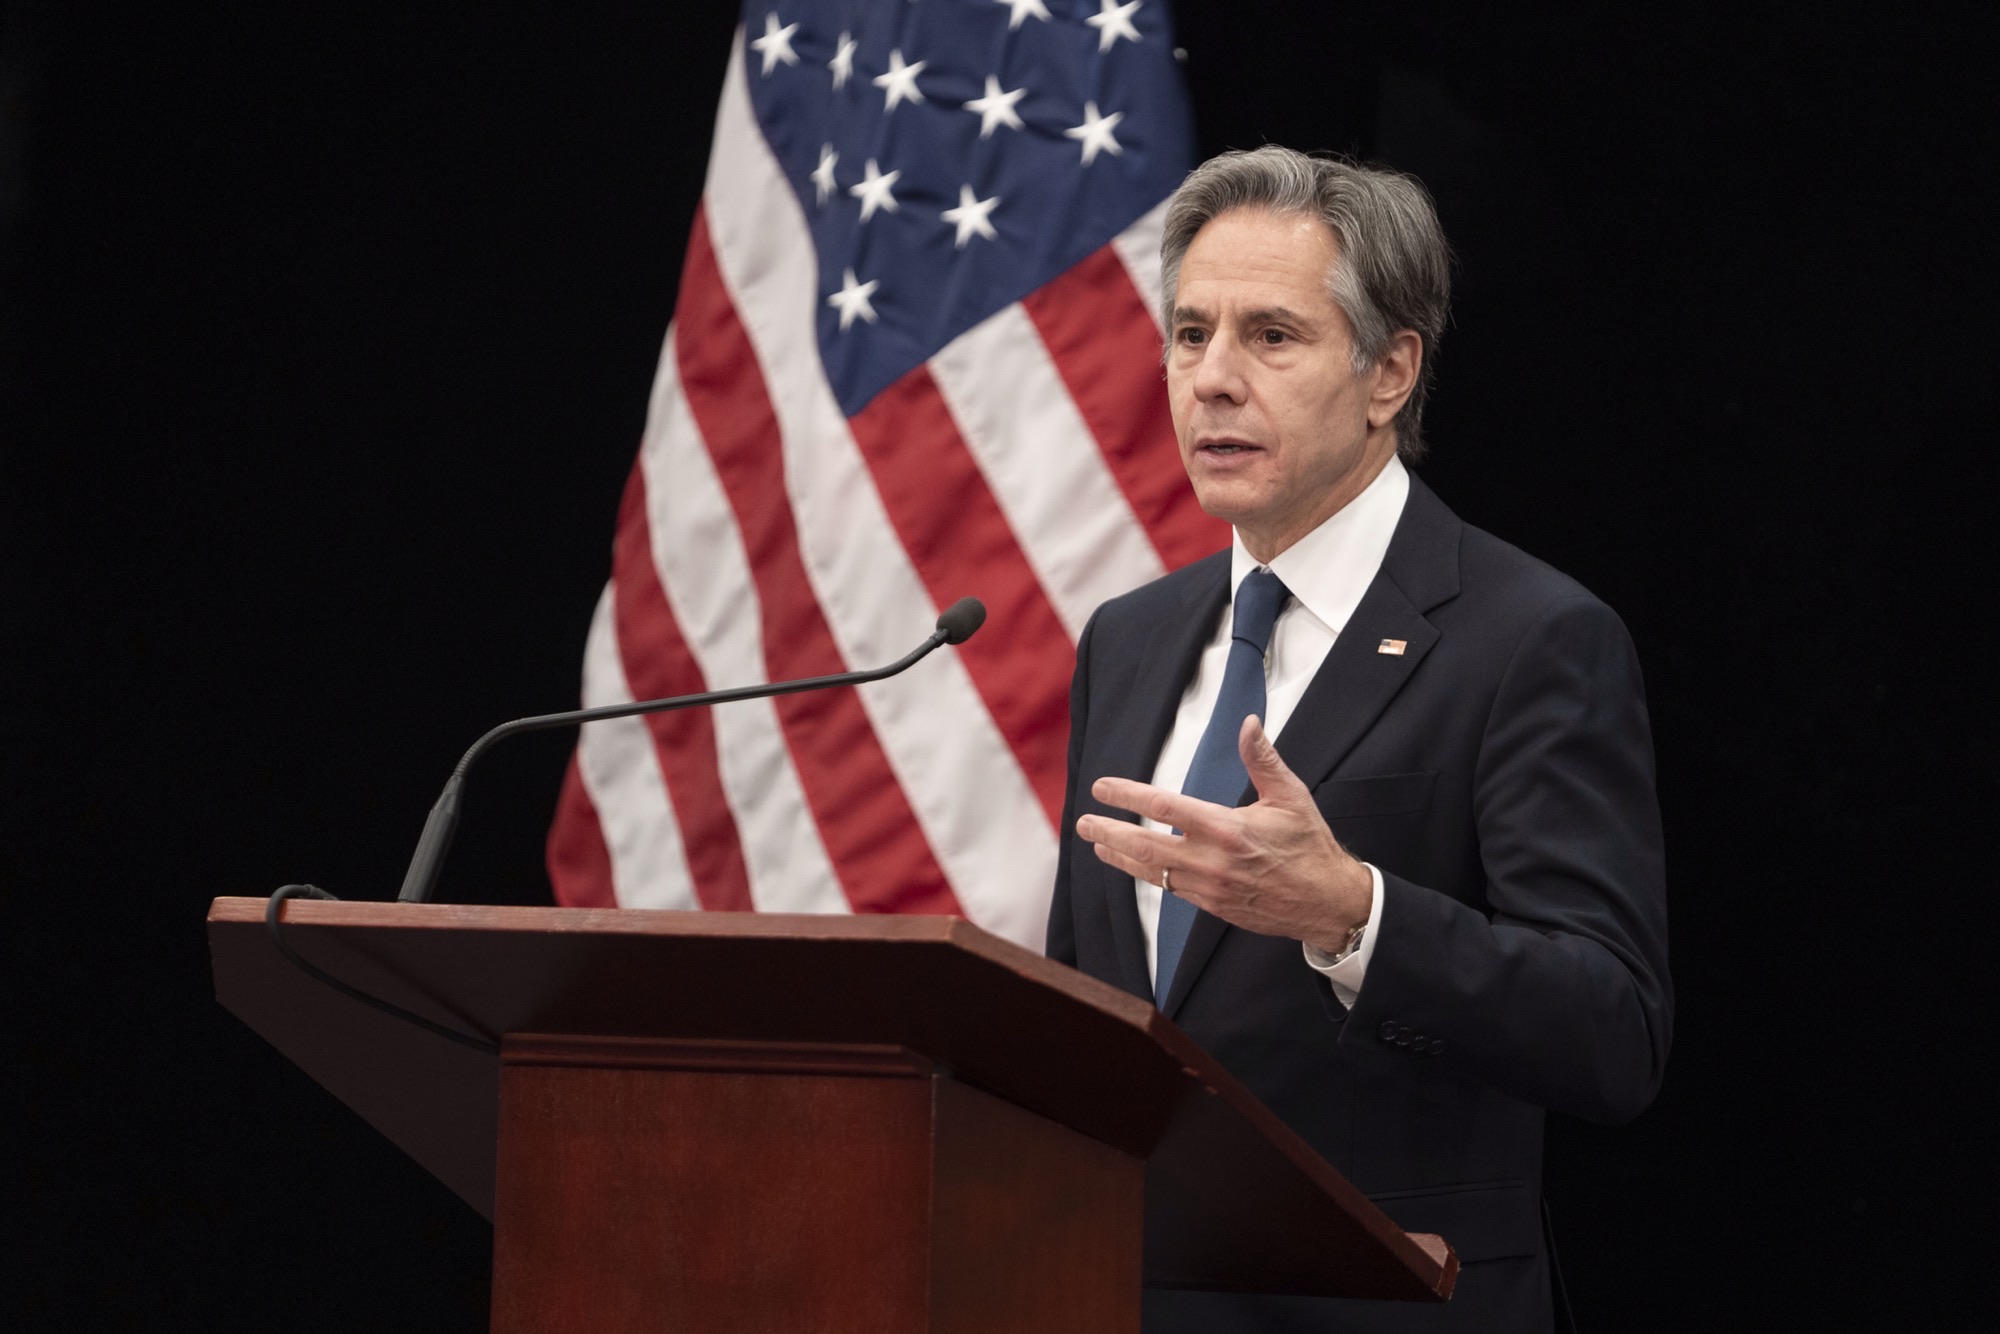 “Ukraine can anticipate a very robust package” of support at NATO Summit – Blinken